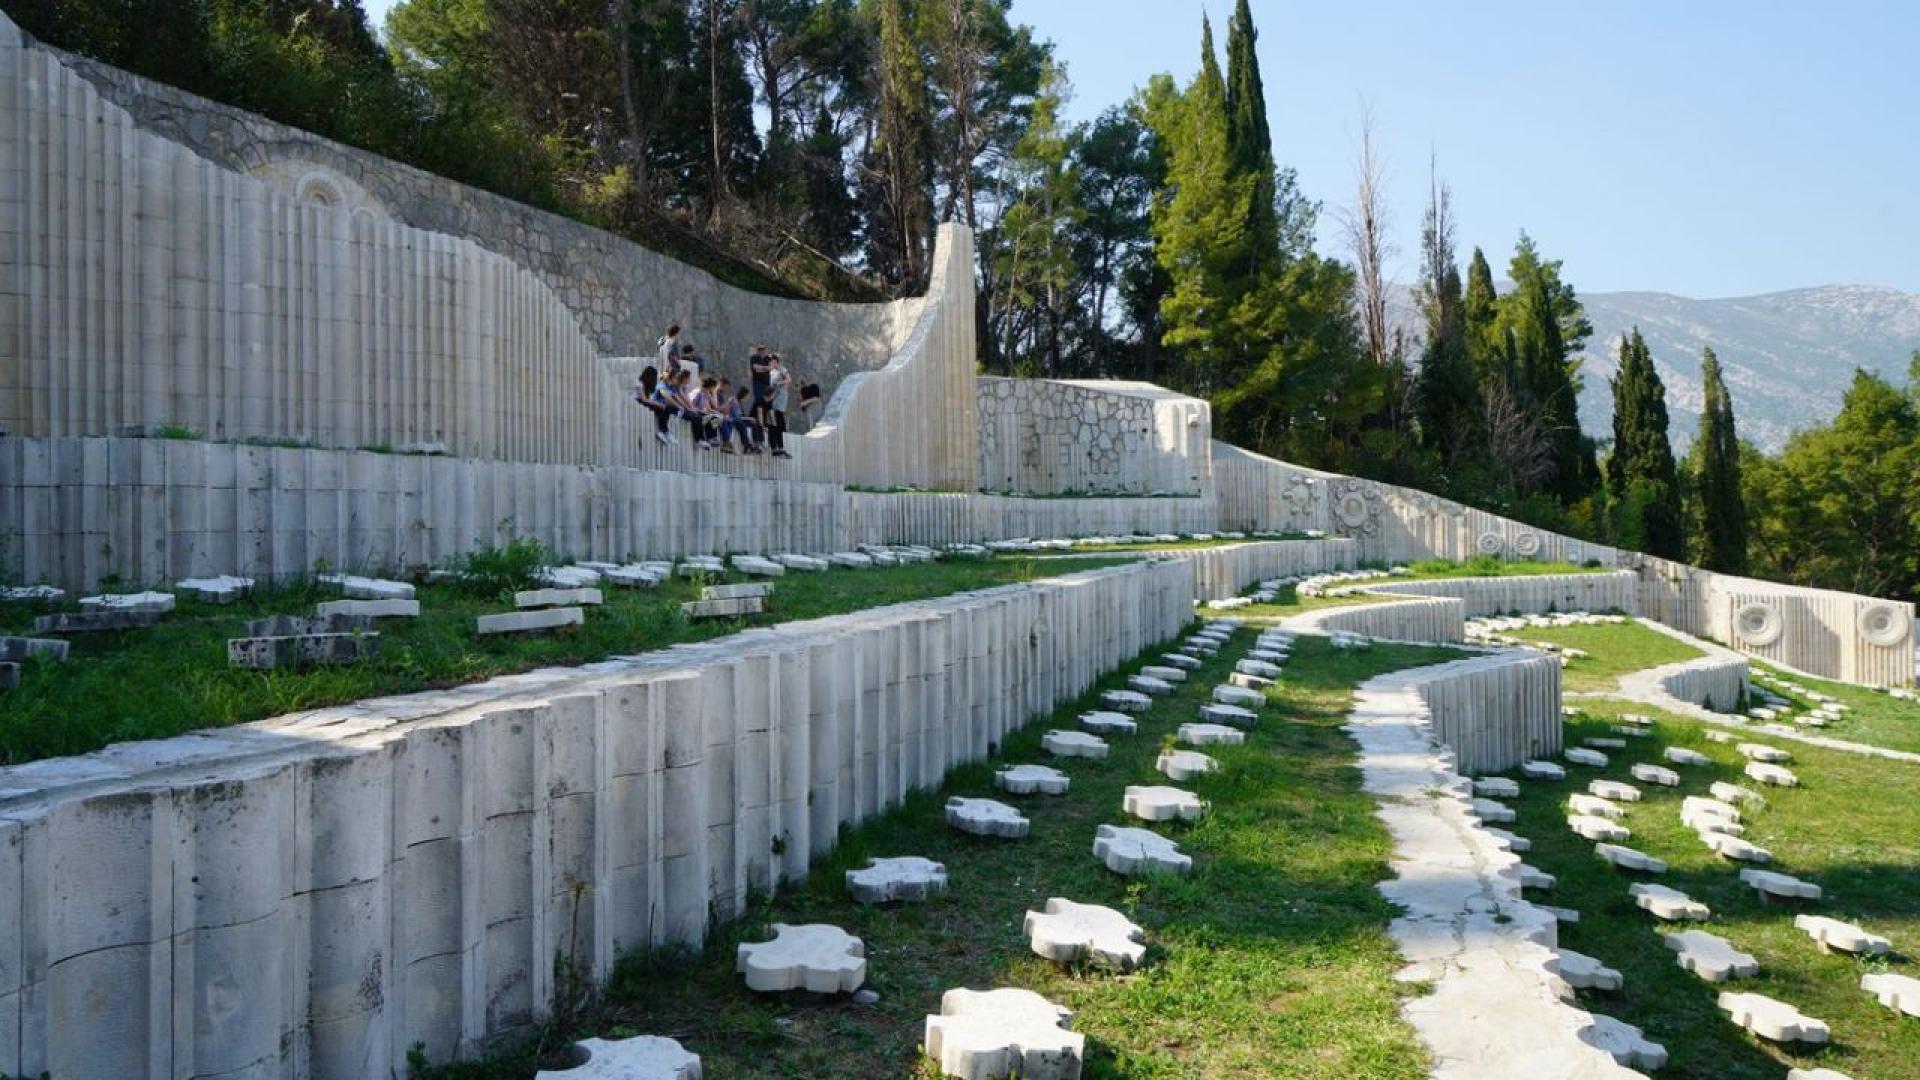 The complex is a necropolis, 630 abstractly shaped stone markers testify the multiethnic army that fought together and is buried here with names belonging to Serbs, Croats, Bosniaks, Jews.